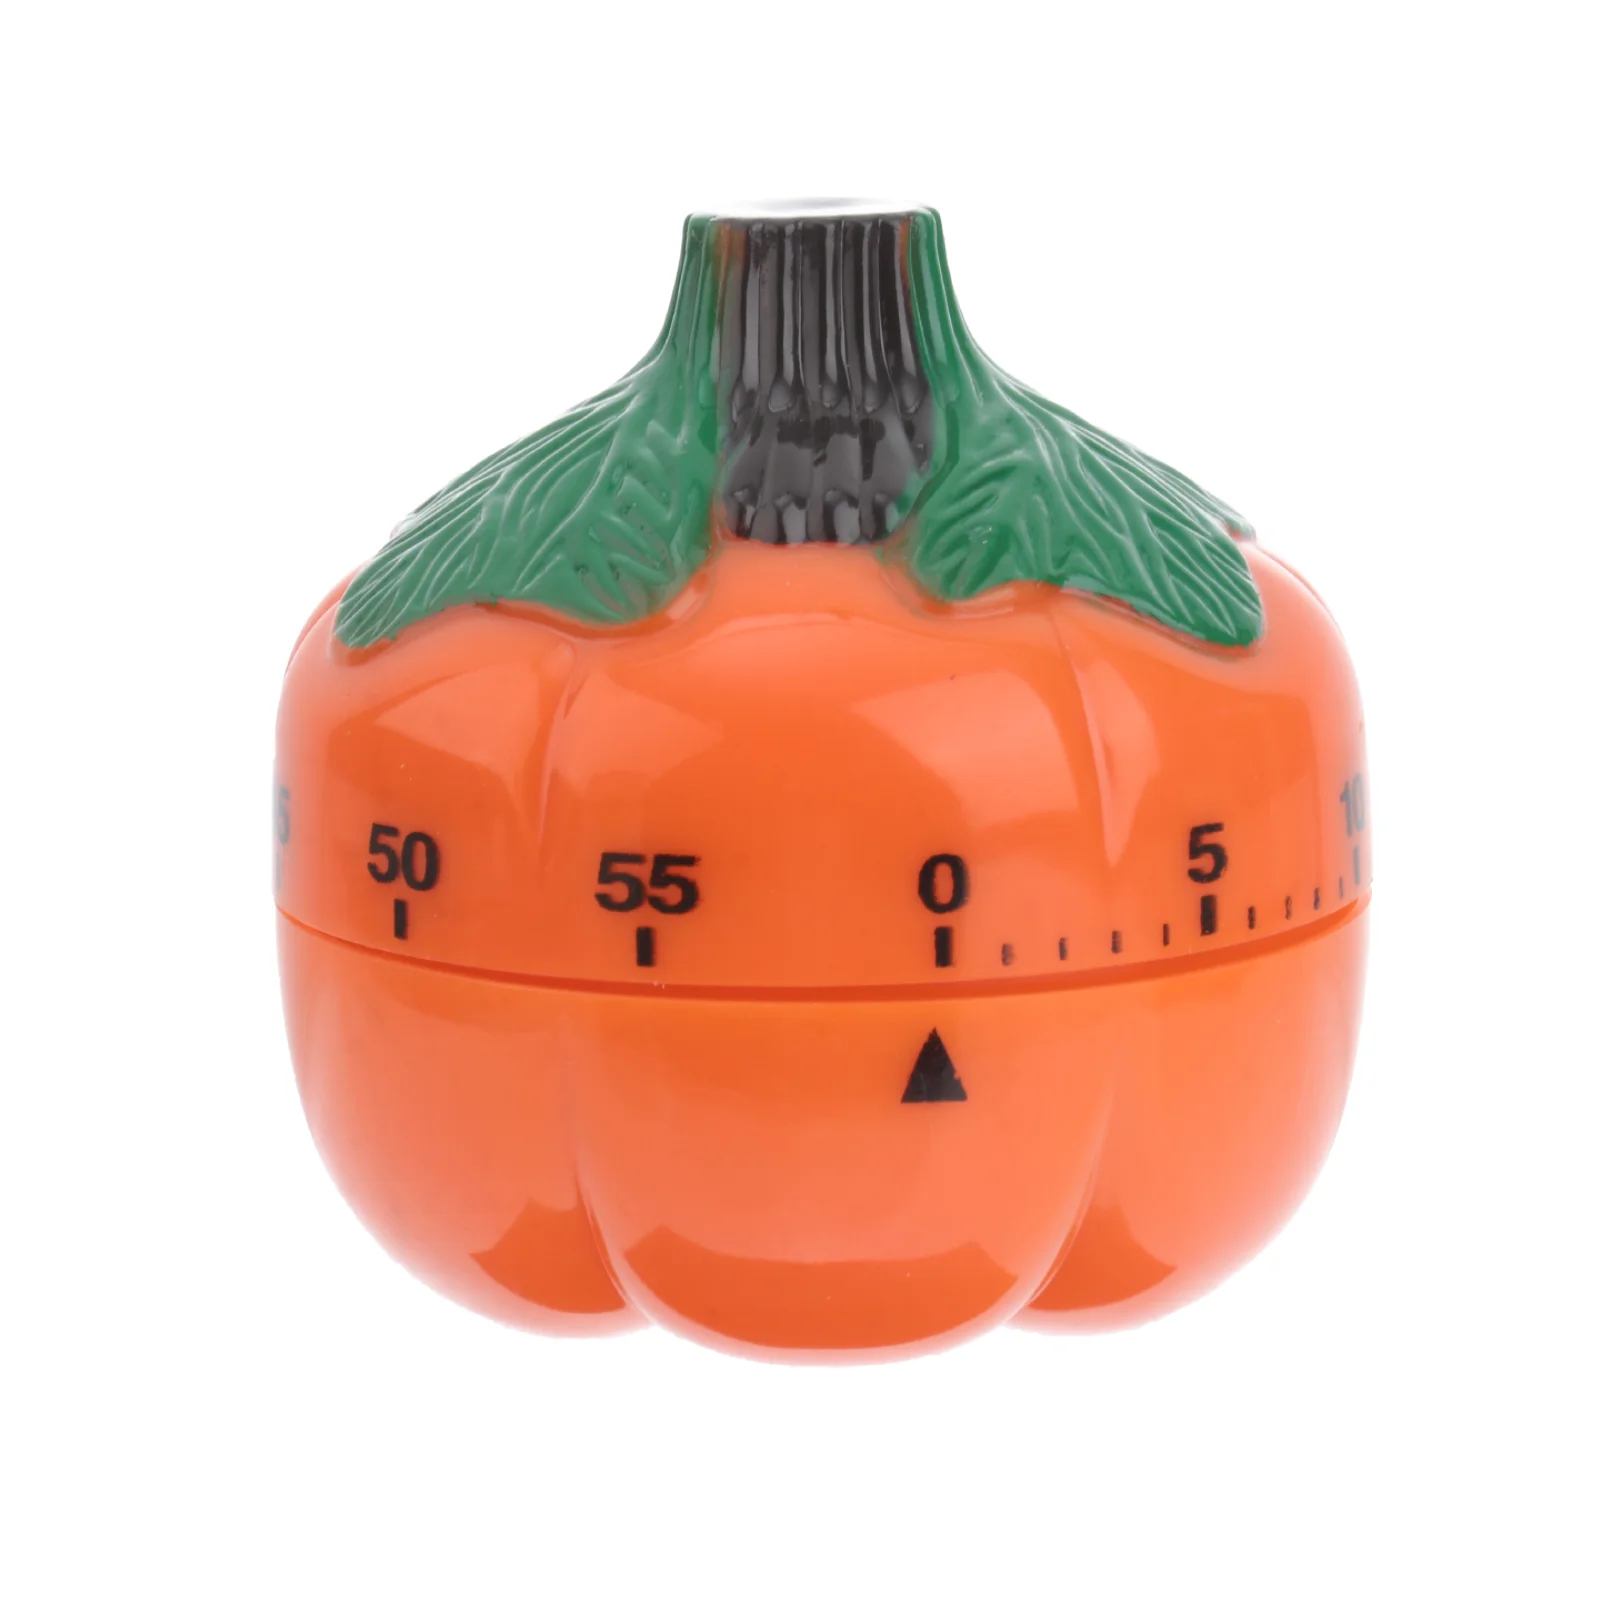 

Mechanical Timer Pumkin Shaped Kitchen Timer Multi- Function Timer Kitchen Mechanical Clock Cooking Time Manager for Tomato